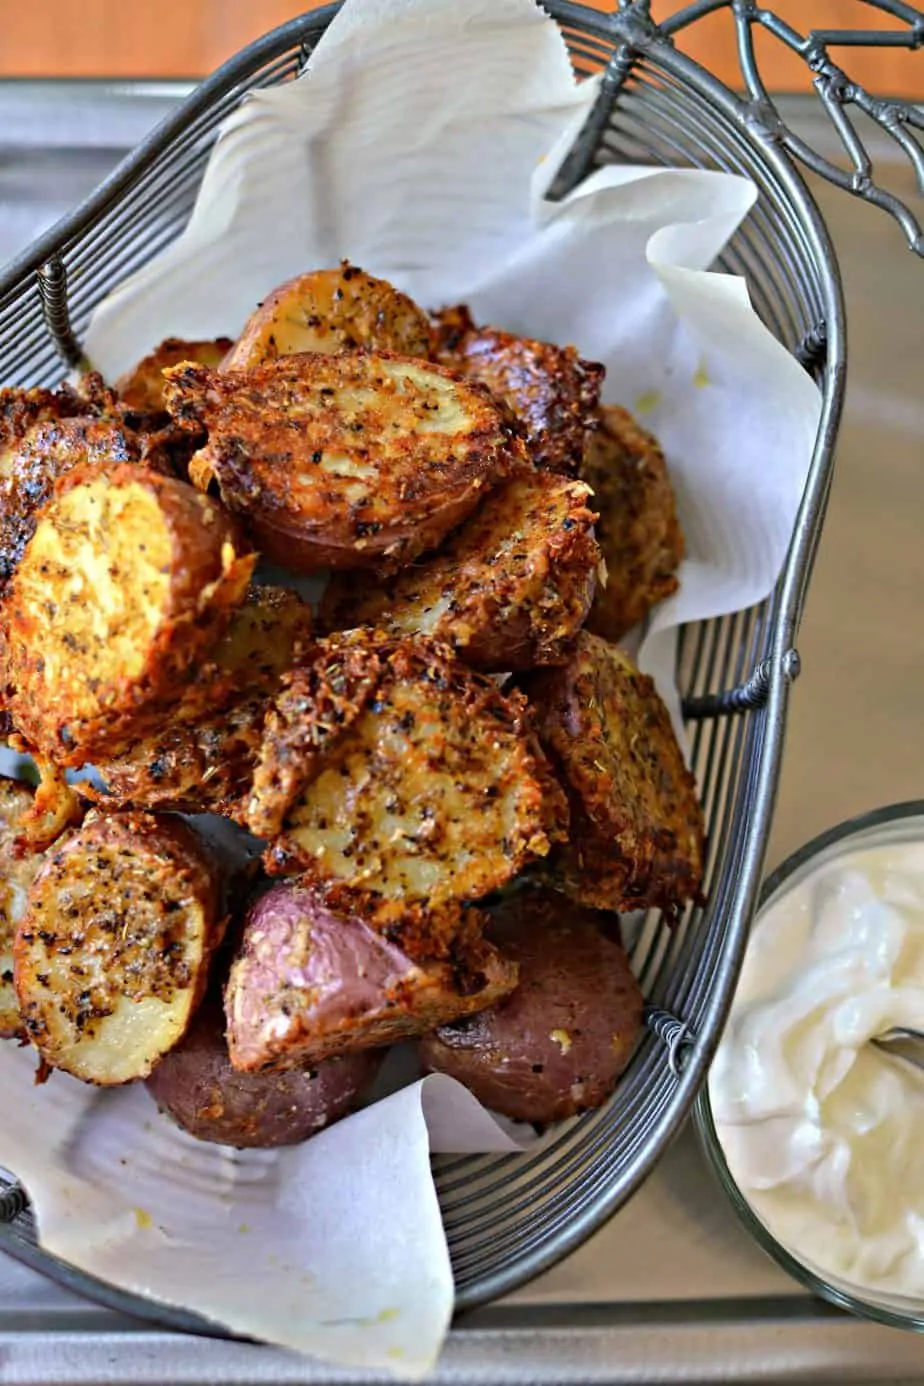 Roasted Red Potatoes with fresh Parmesan and herbs are easy, quick and delicious. .